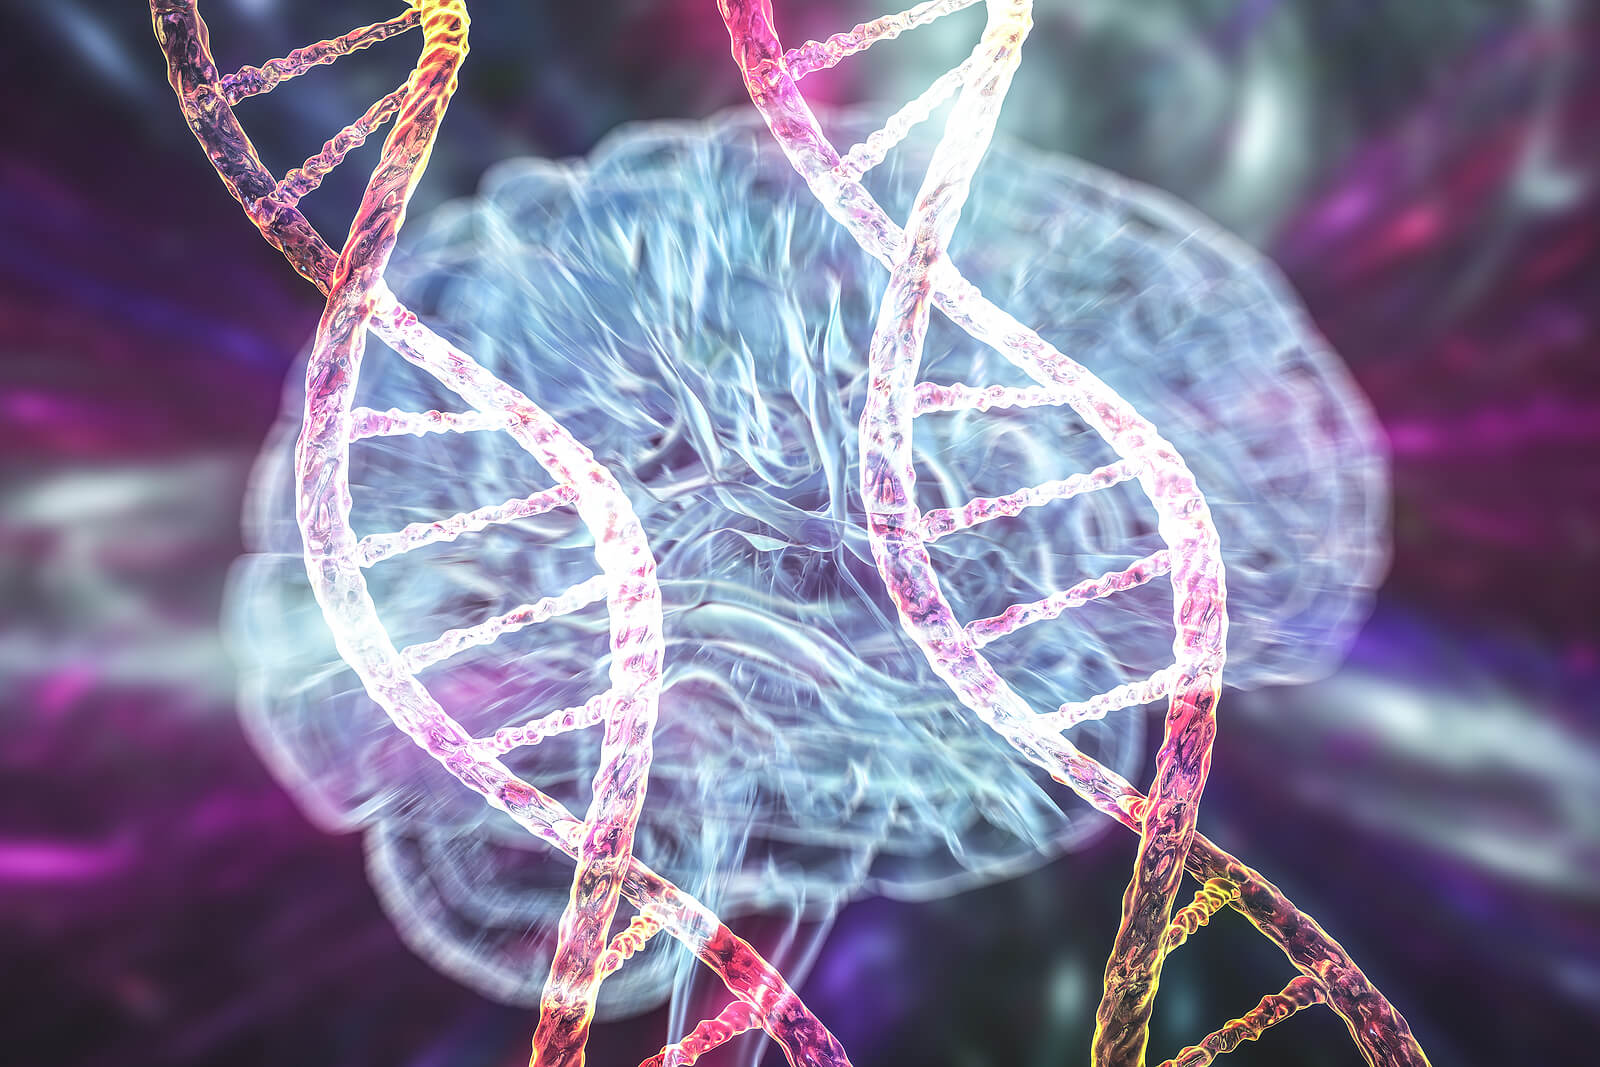 The causes and risk factors of Parkinson's disease include genetics